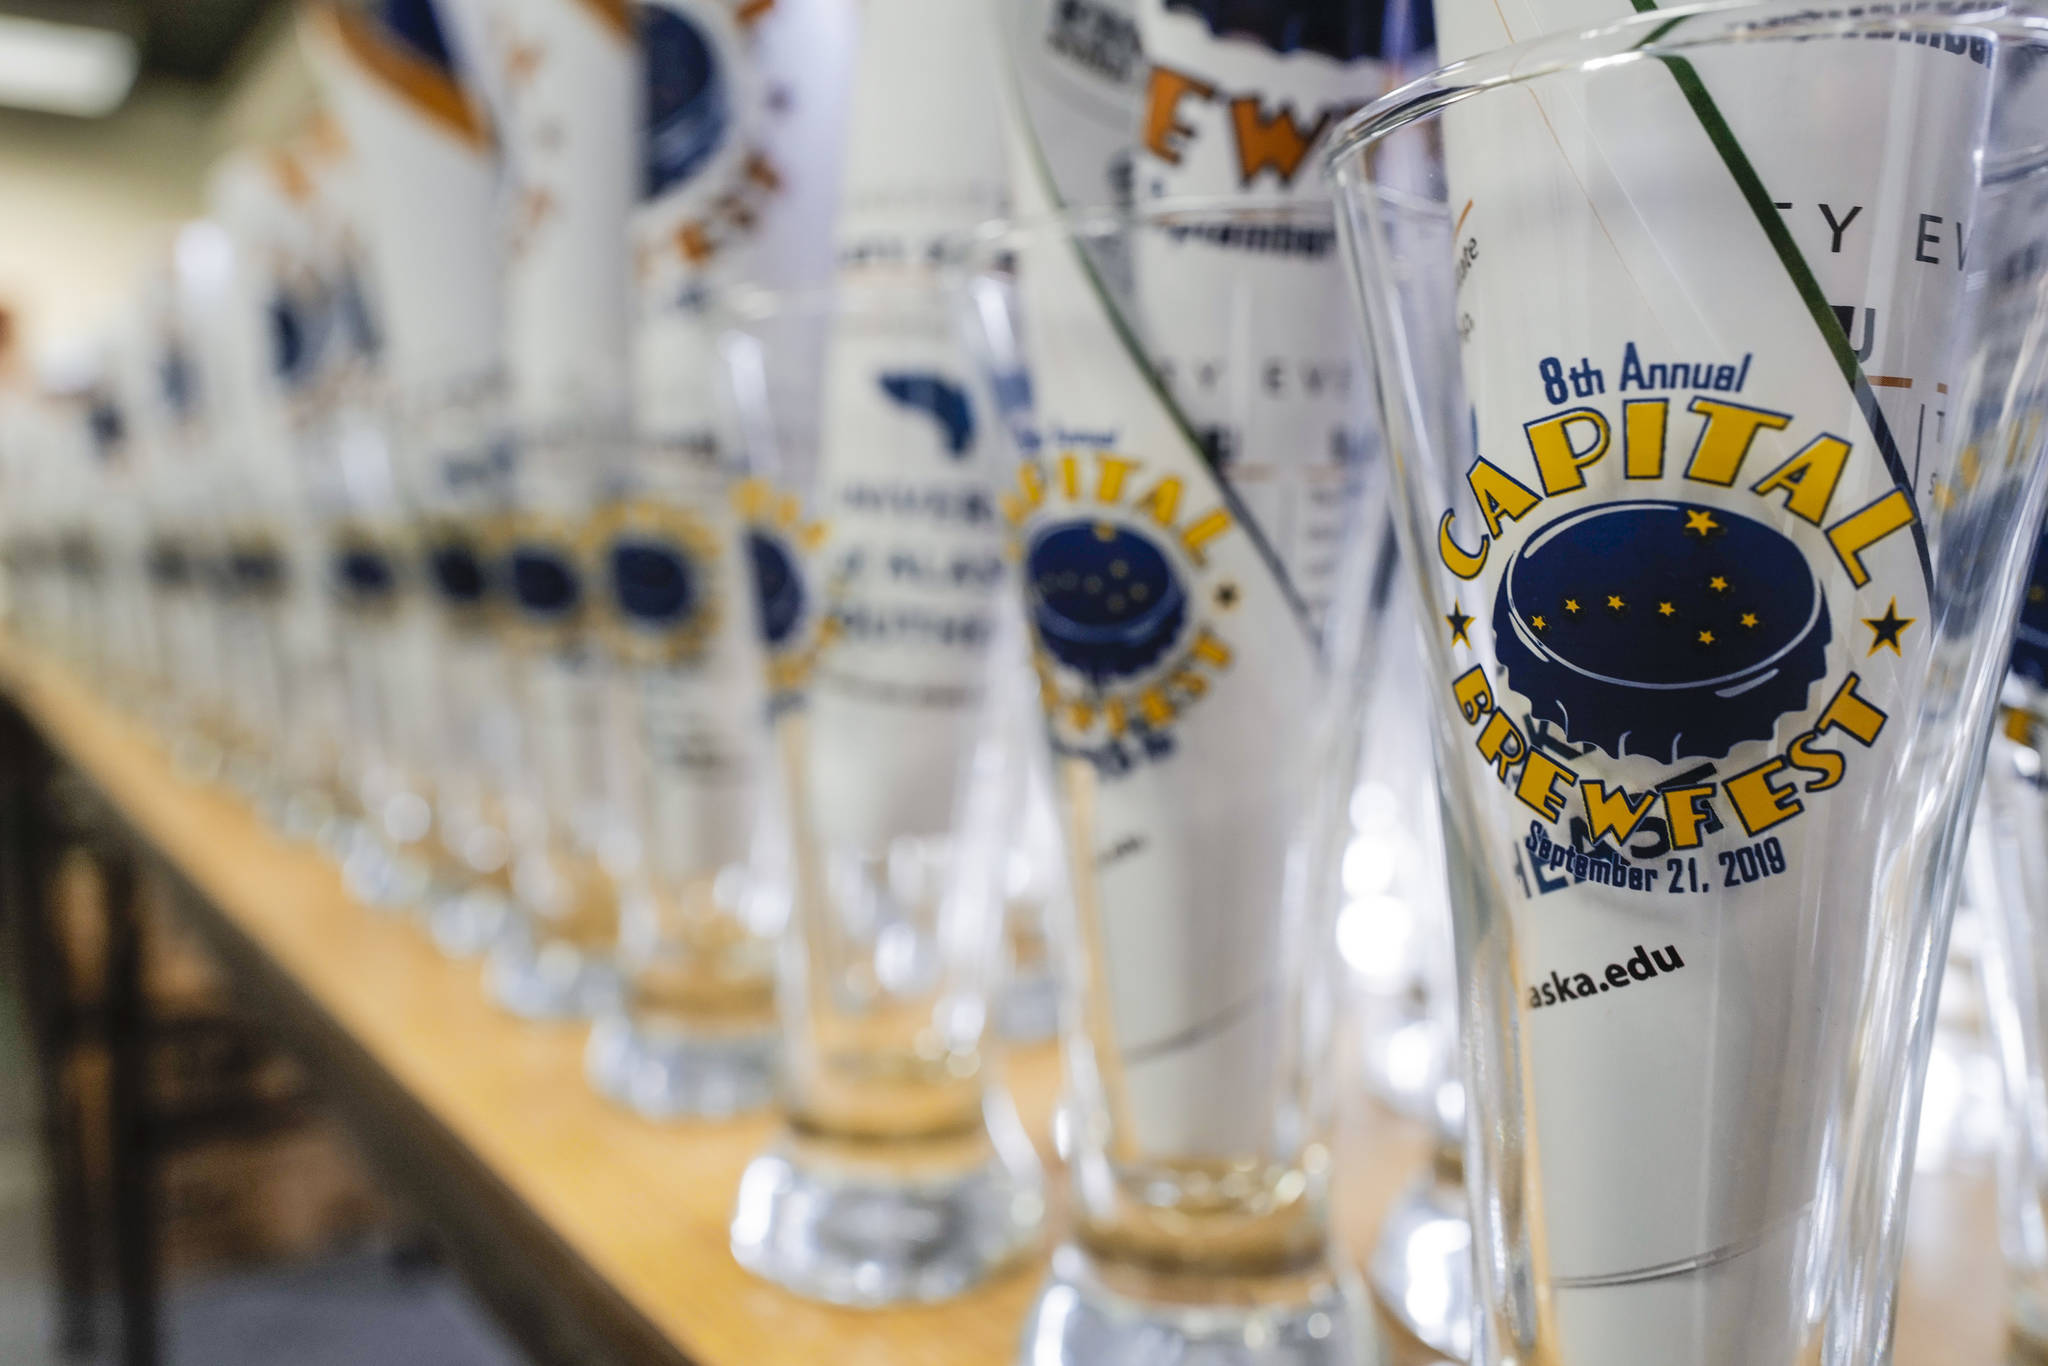 Juneau residents turn out for the Rotary Club of Juneau’s Eighth Annual Capital Brewfest at the Juneau Arts and Culture Center on Saturday, Sept. 21, 2019. Twenty brewing and distribution companies were on hand for the fundraiser to benefit the University of Alaska and Rotary’s service projects, scholarships, international youth exchanges and other project. The event was sold out with 900 tickets sold. (Michael Penn | Juneau Empire)